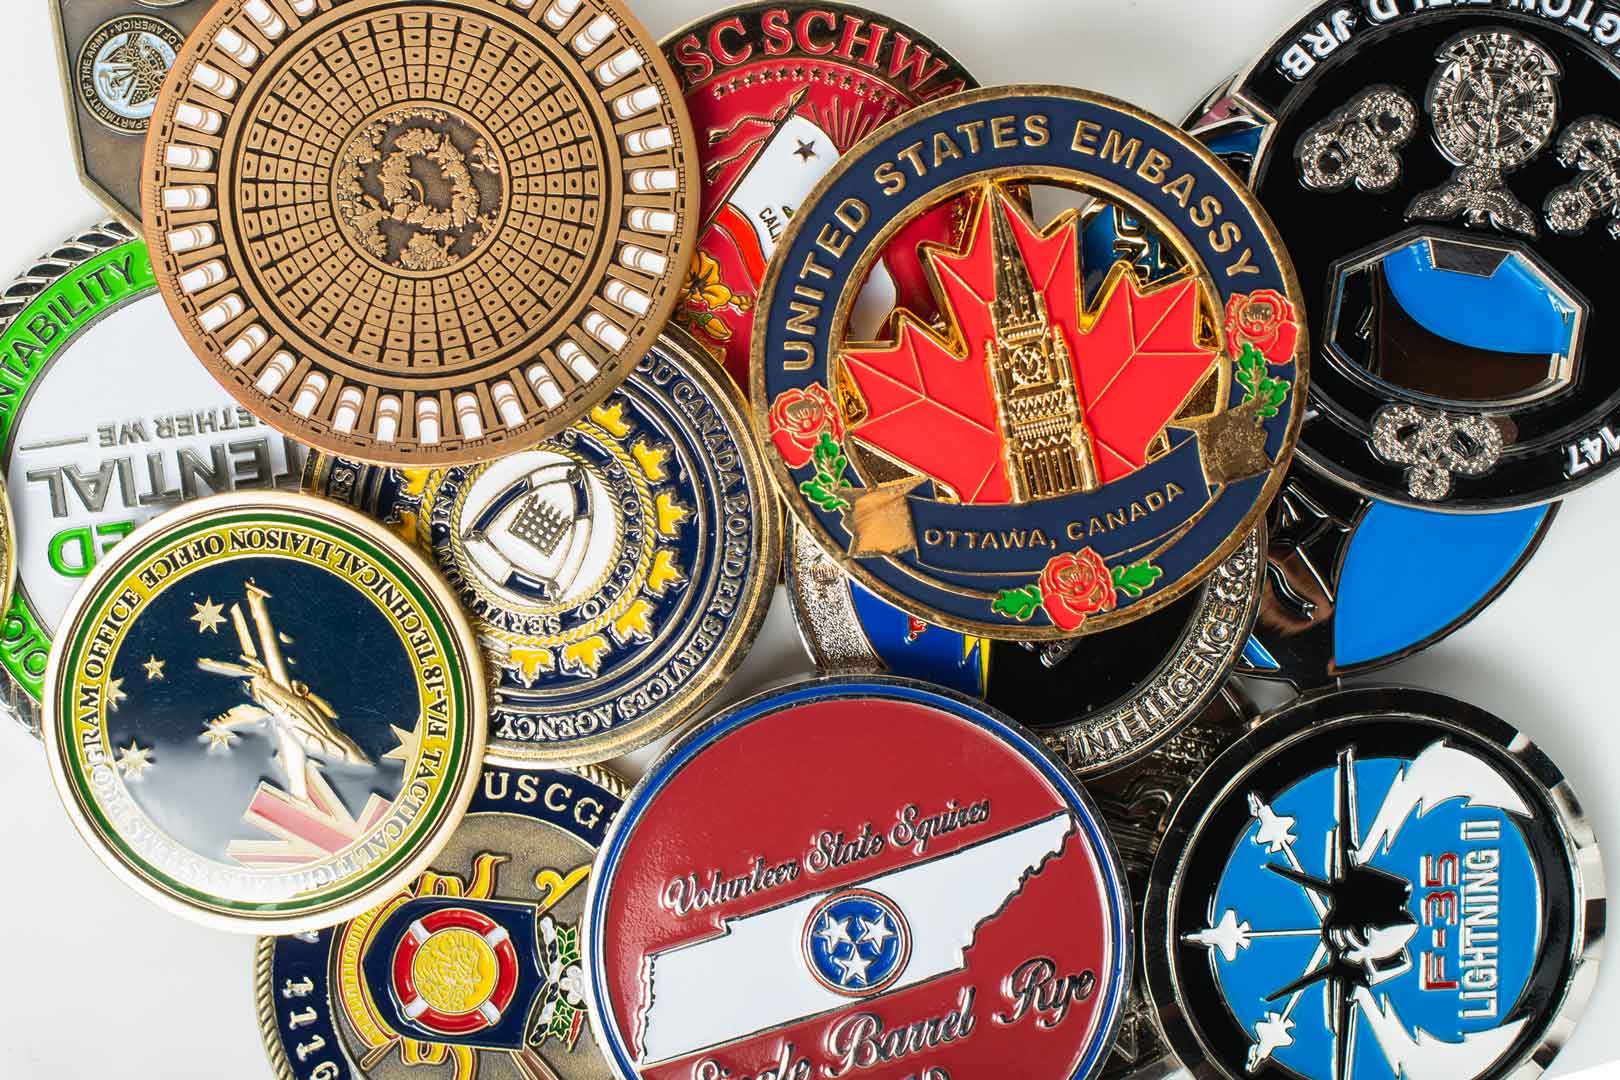 Celebrating the Artistry and Craftsmanship of Commemorative Challenge Coin Creation